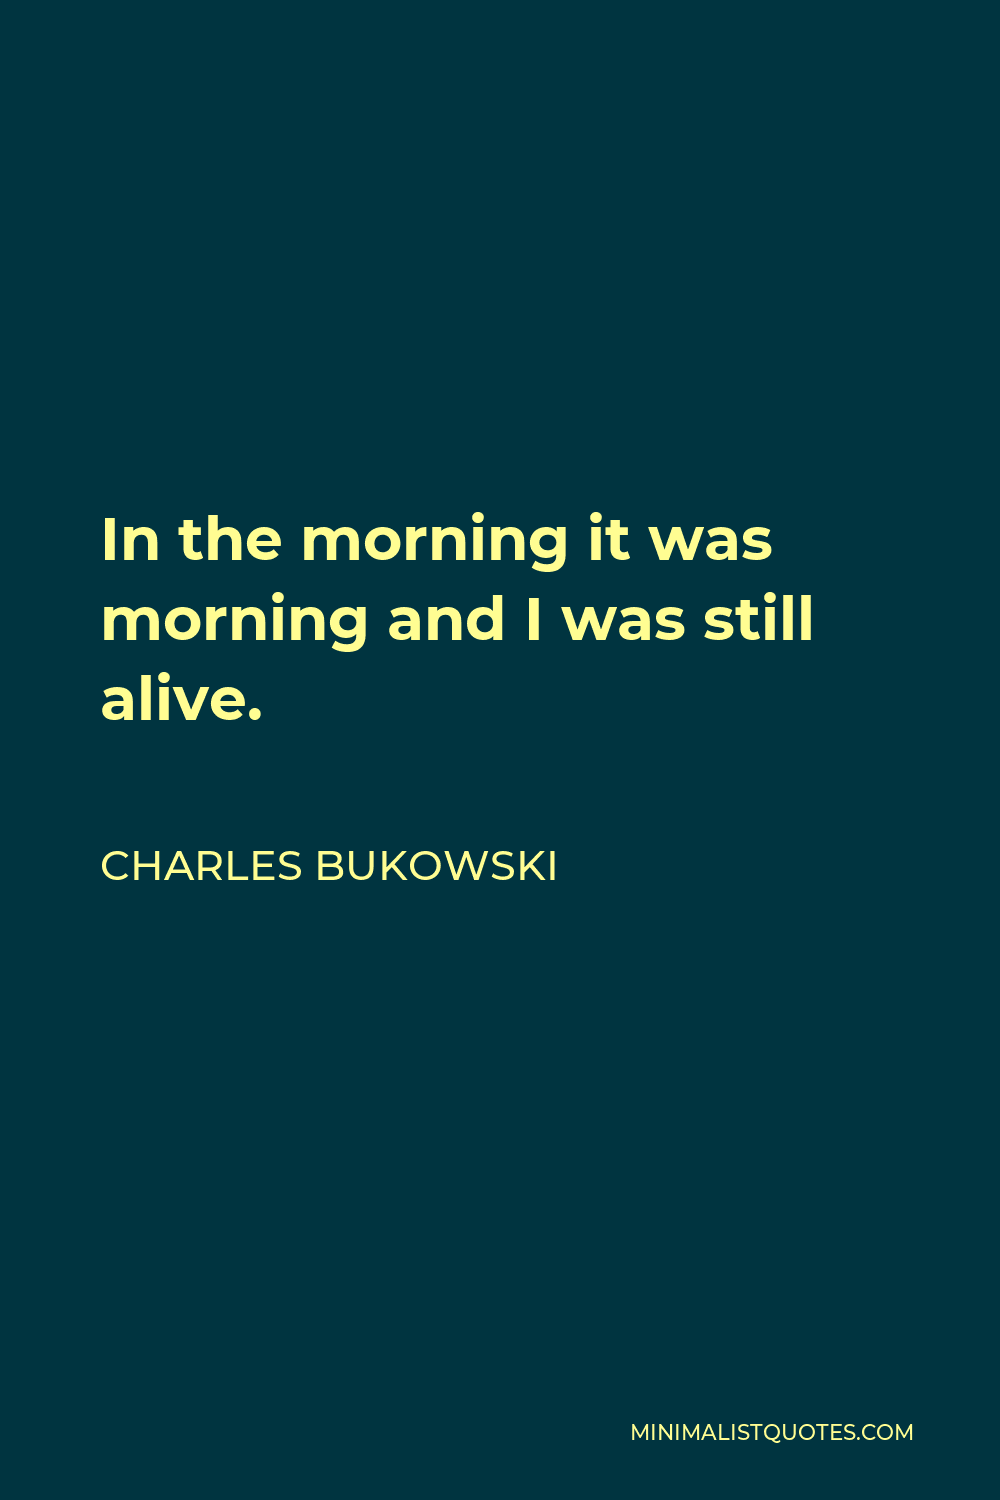 Charles Bukowski Quote - In the morning it was morning and I was still alive.